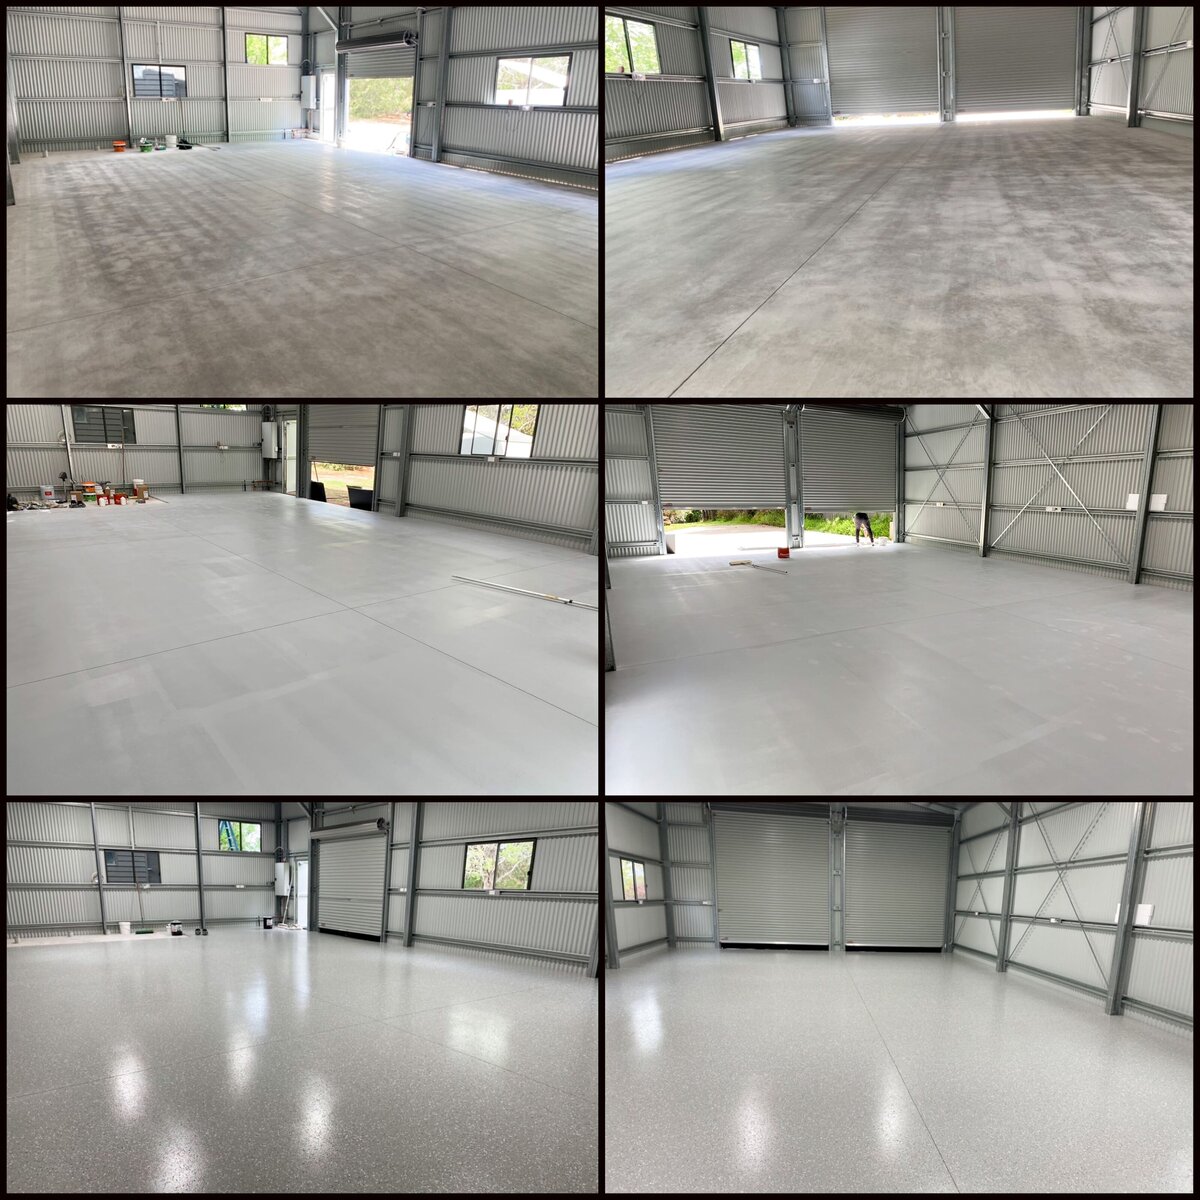 6 tiled images of stages of the epoxy flooring application to a industrial warehouse